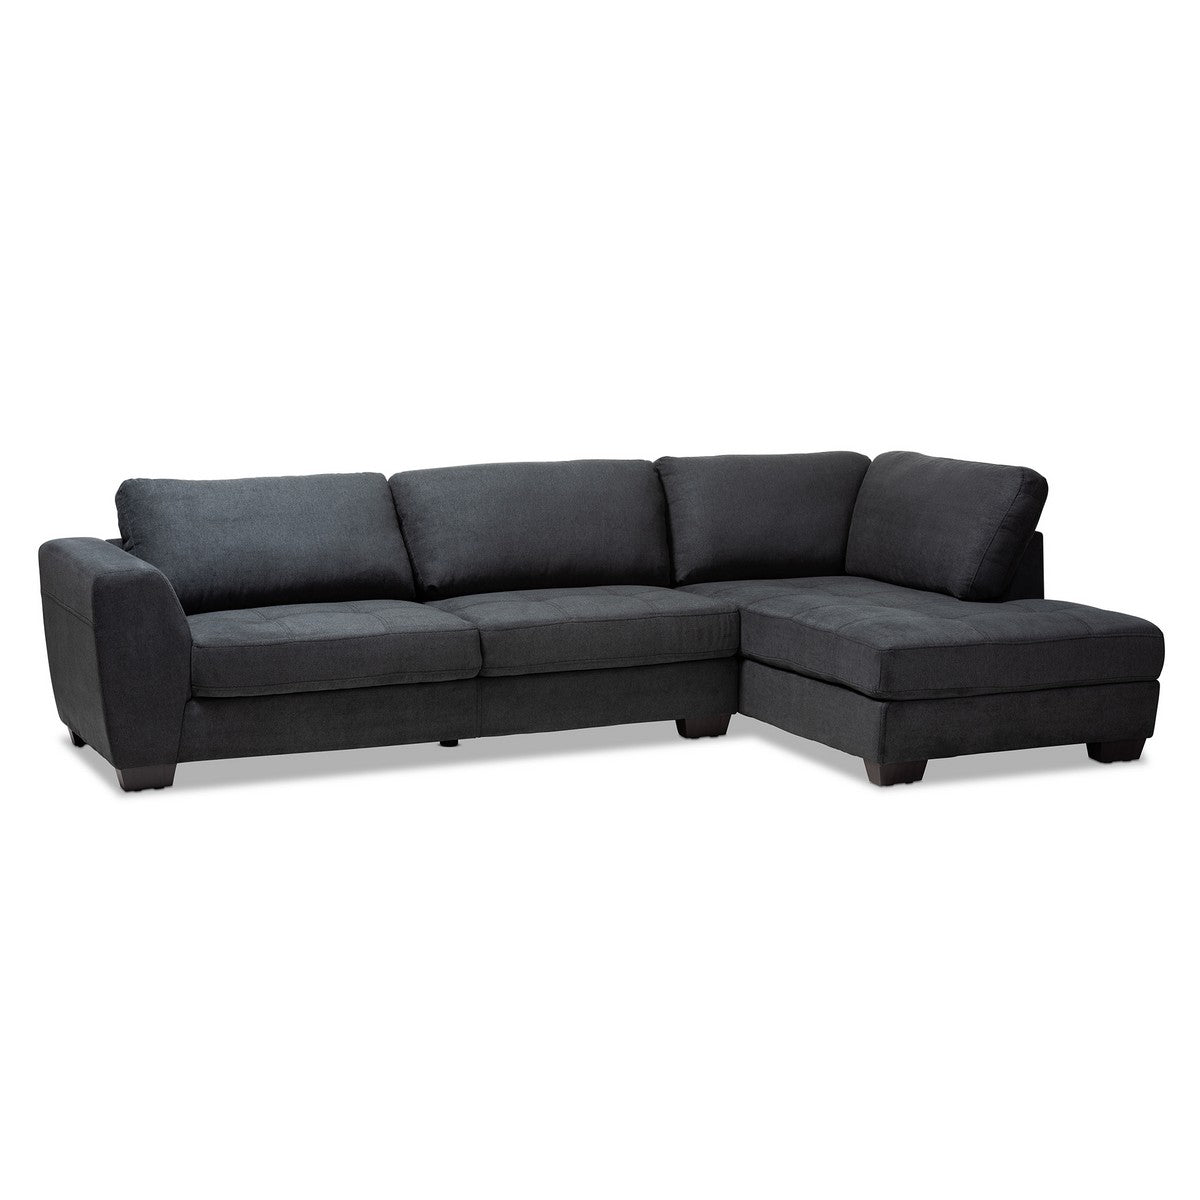 Baxton Studio Petra Modern and Contemporary Charcoal Fabric Upholstered Right Facing Sectional Sofa Baxton Studio-sofas-Minimal And Modern - 1